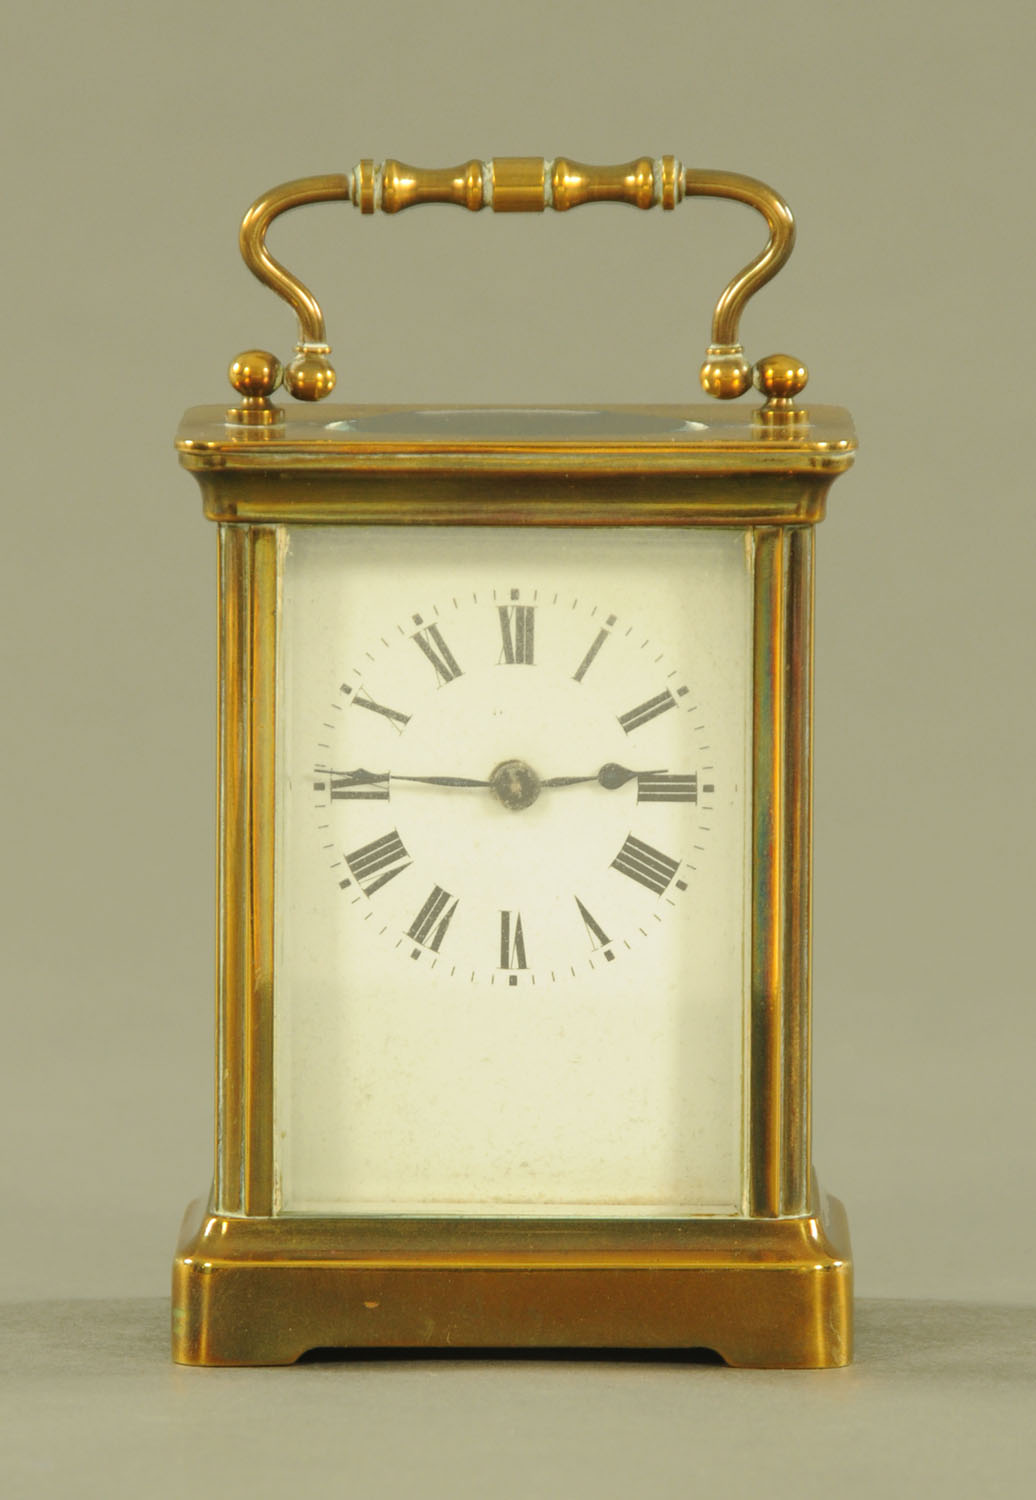 A brass cased carriage clock, timepiece only. Height excluding carrying handle 11 cm.